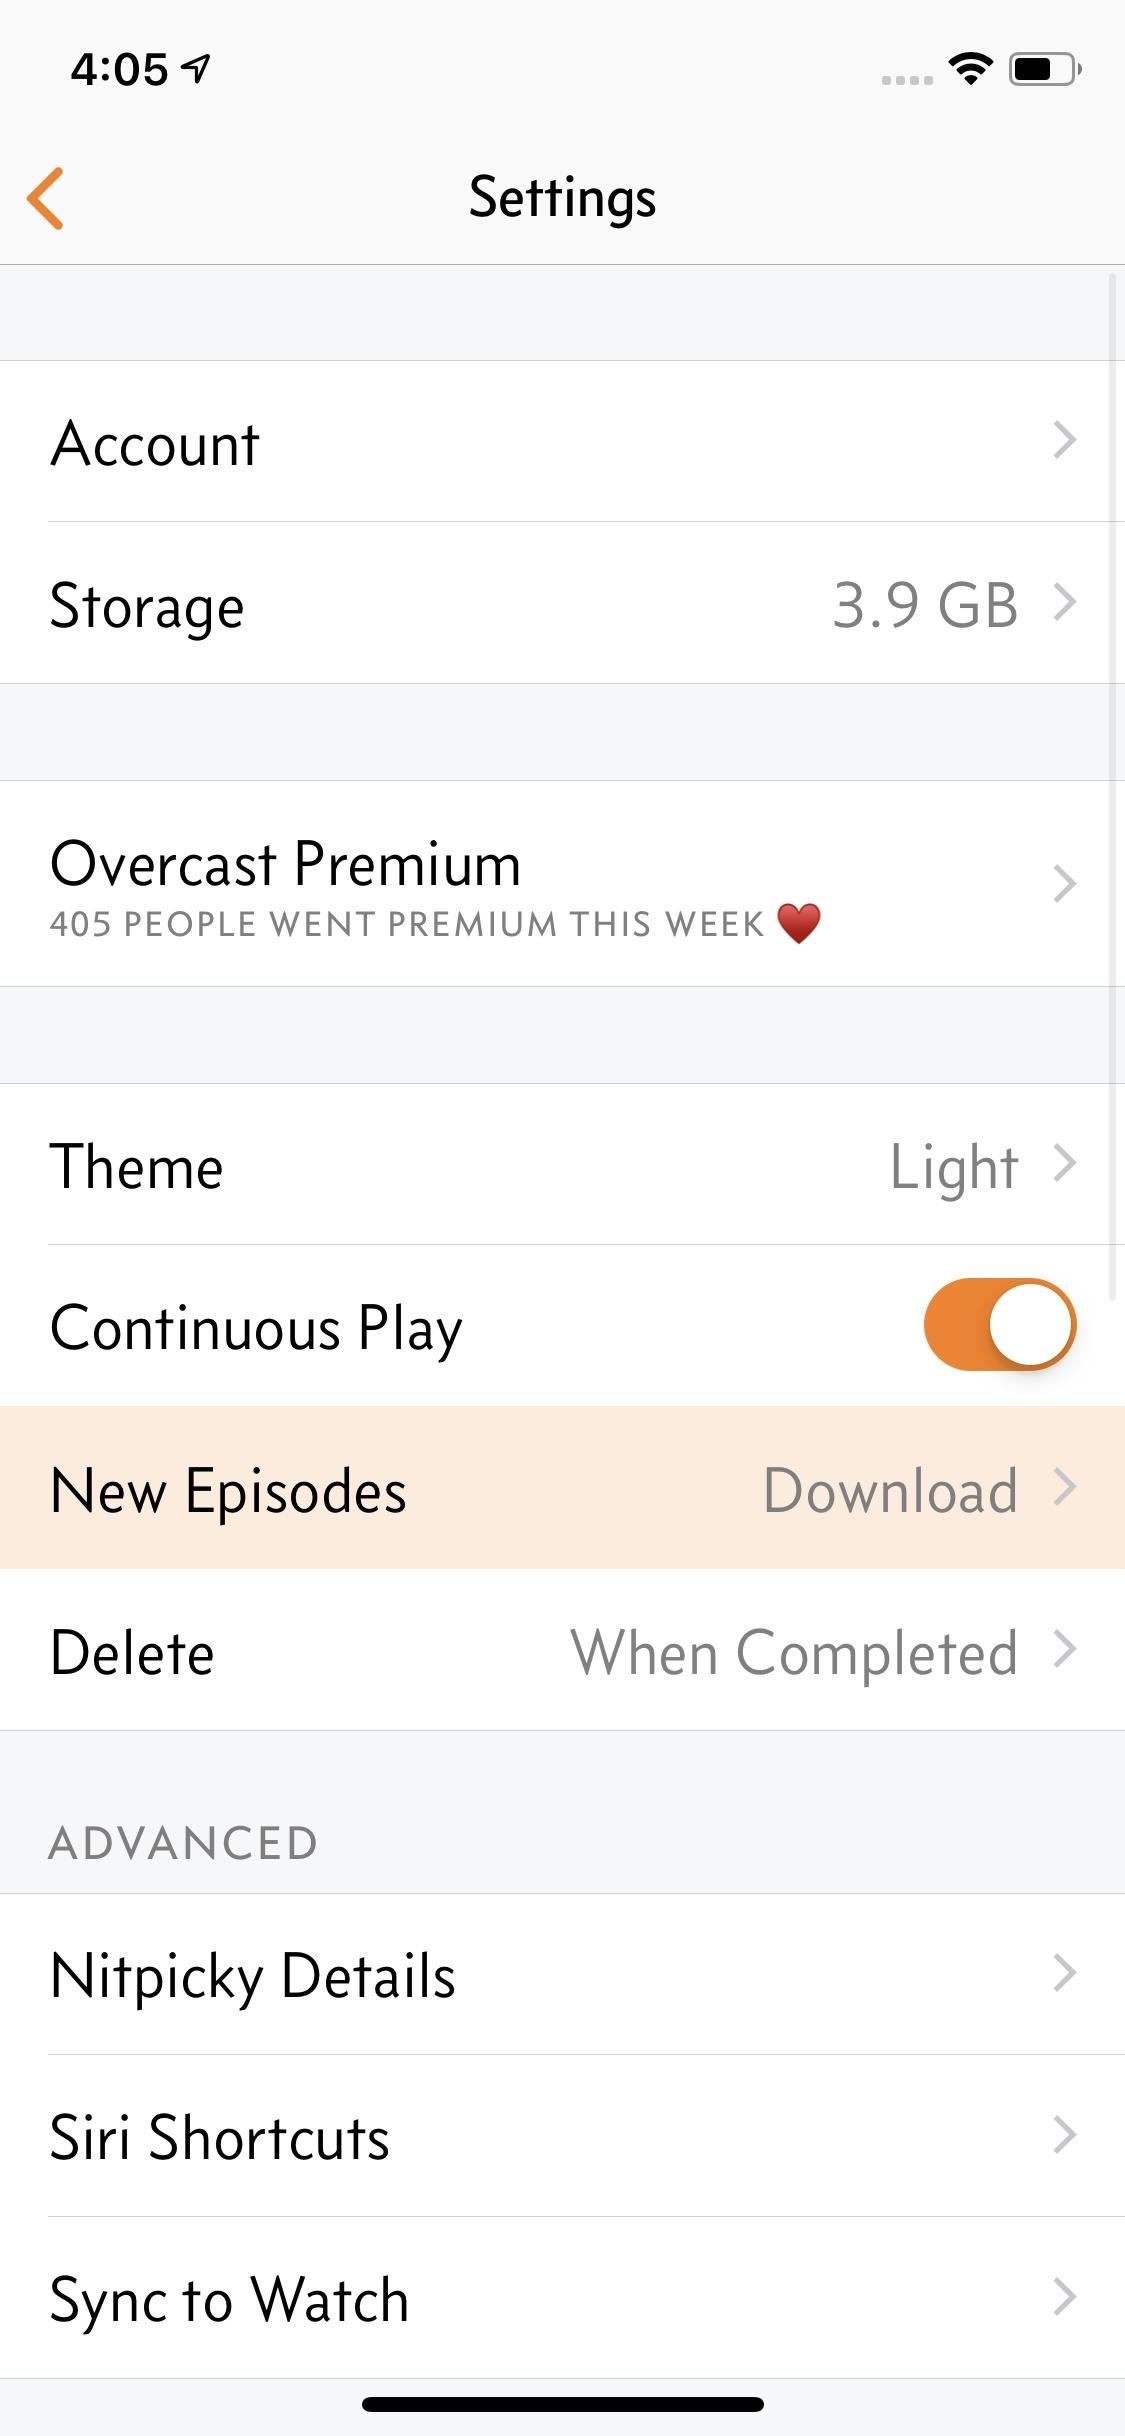 How to Share Audio & Video Clips in Overcast to Show Off Your Favorite Podcasts